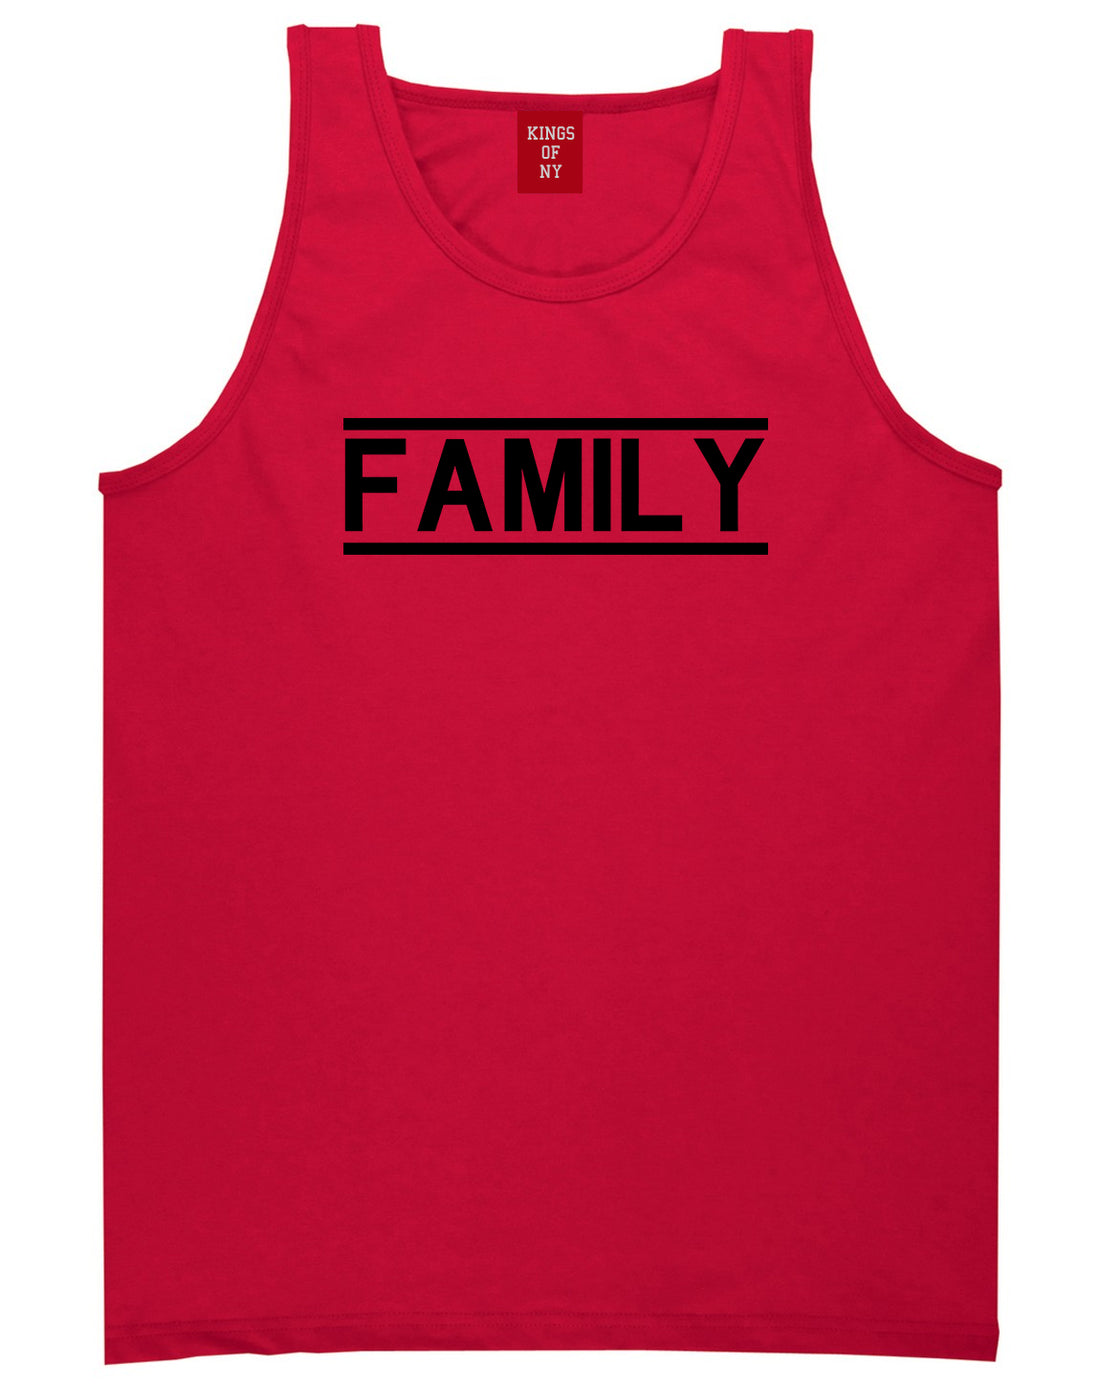 Family Fam Squad Mens Red Tank Top Shirt by KINGS OF NY